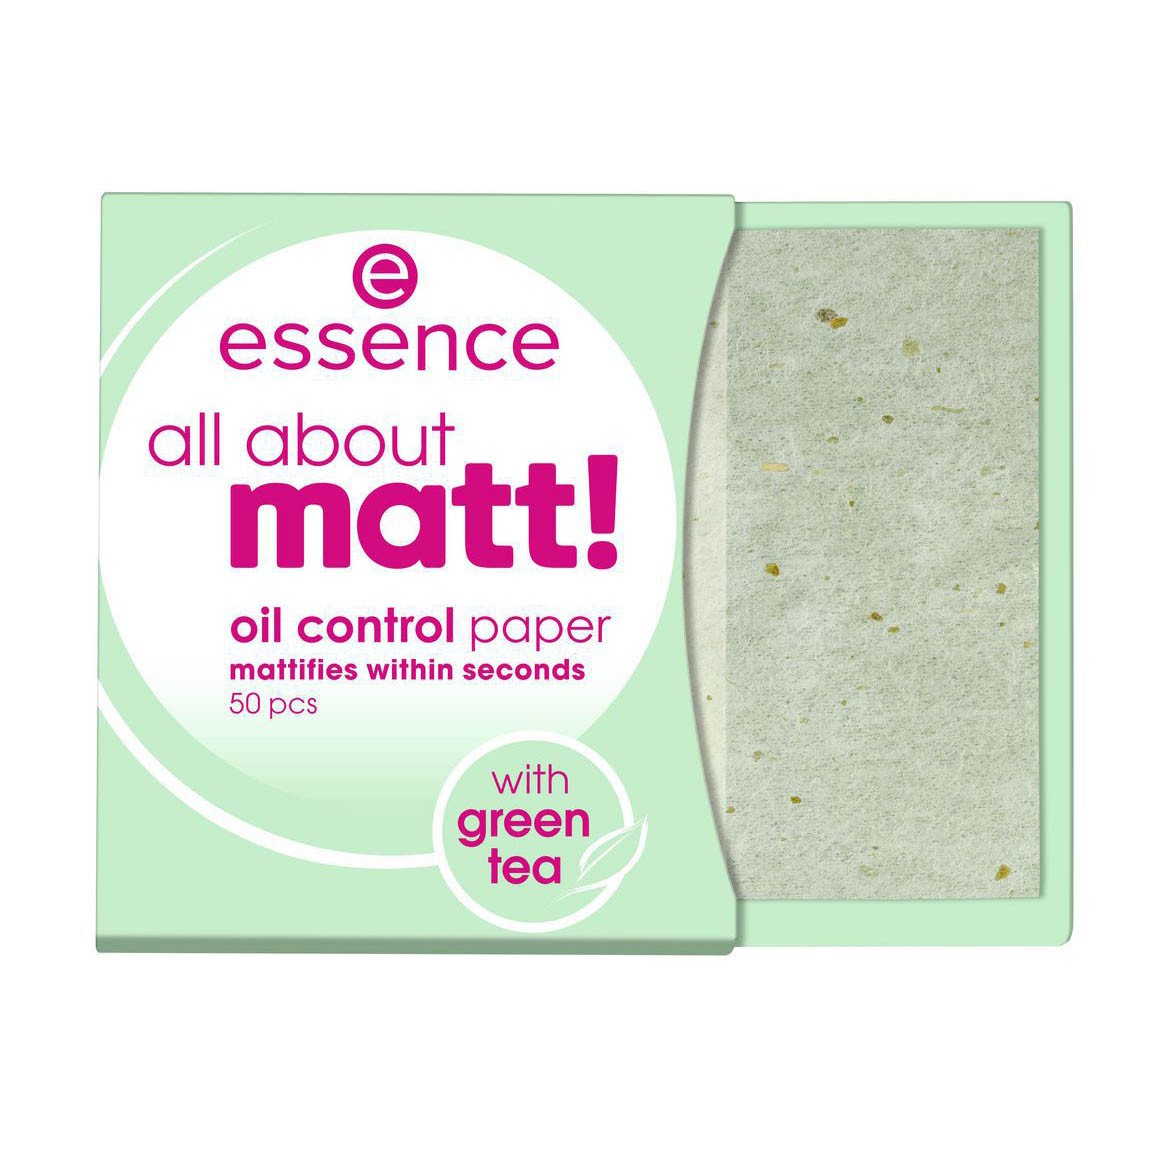 All About Matt! Oil Control Paper (50 Pieces)